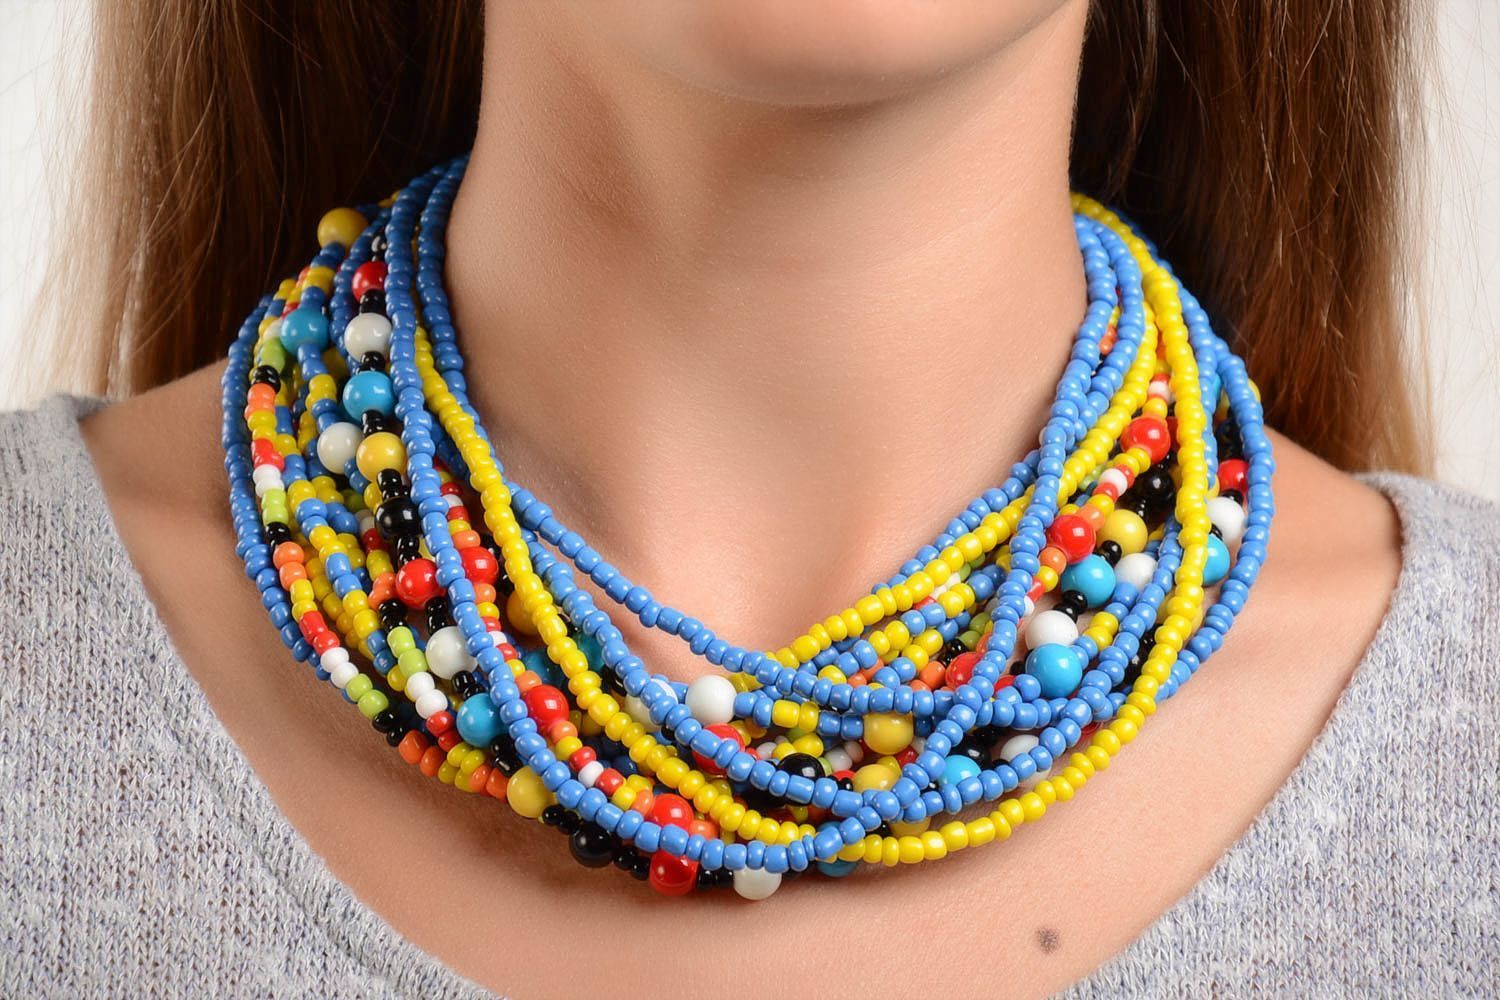 Beaded necklace homemade jewelry fashion necklace birthday gifts for her photo 1